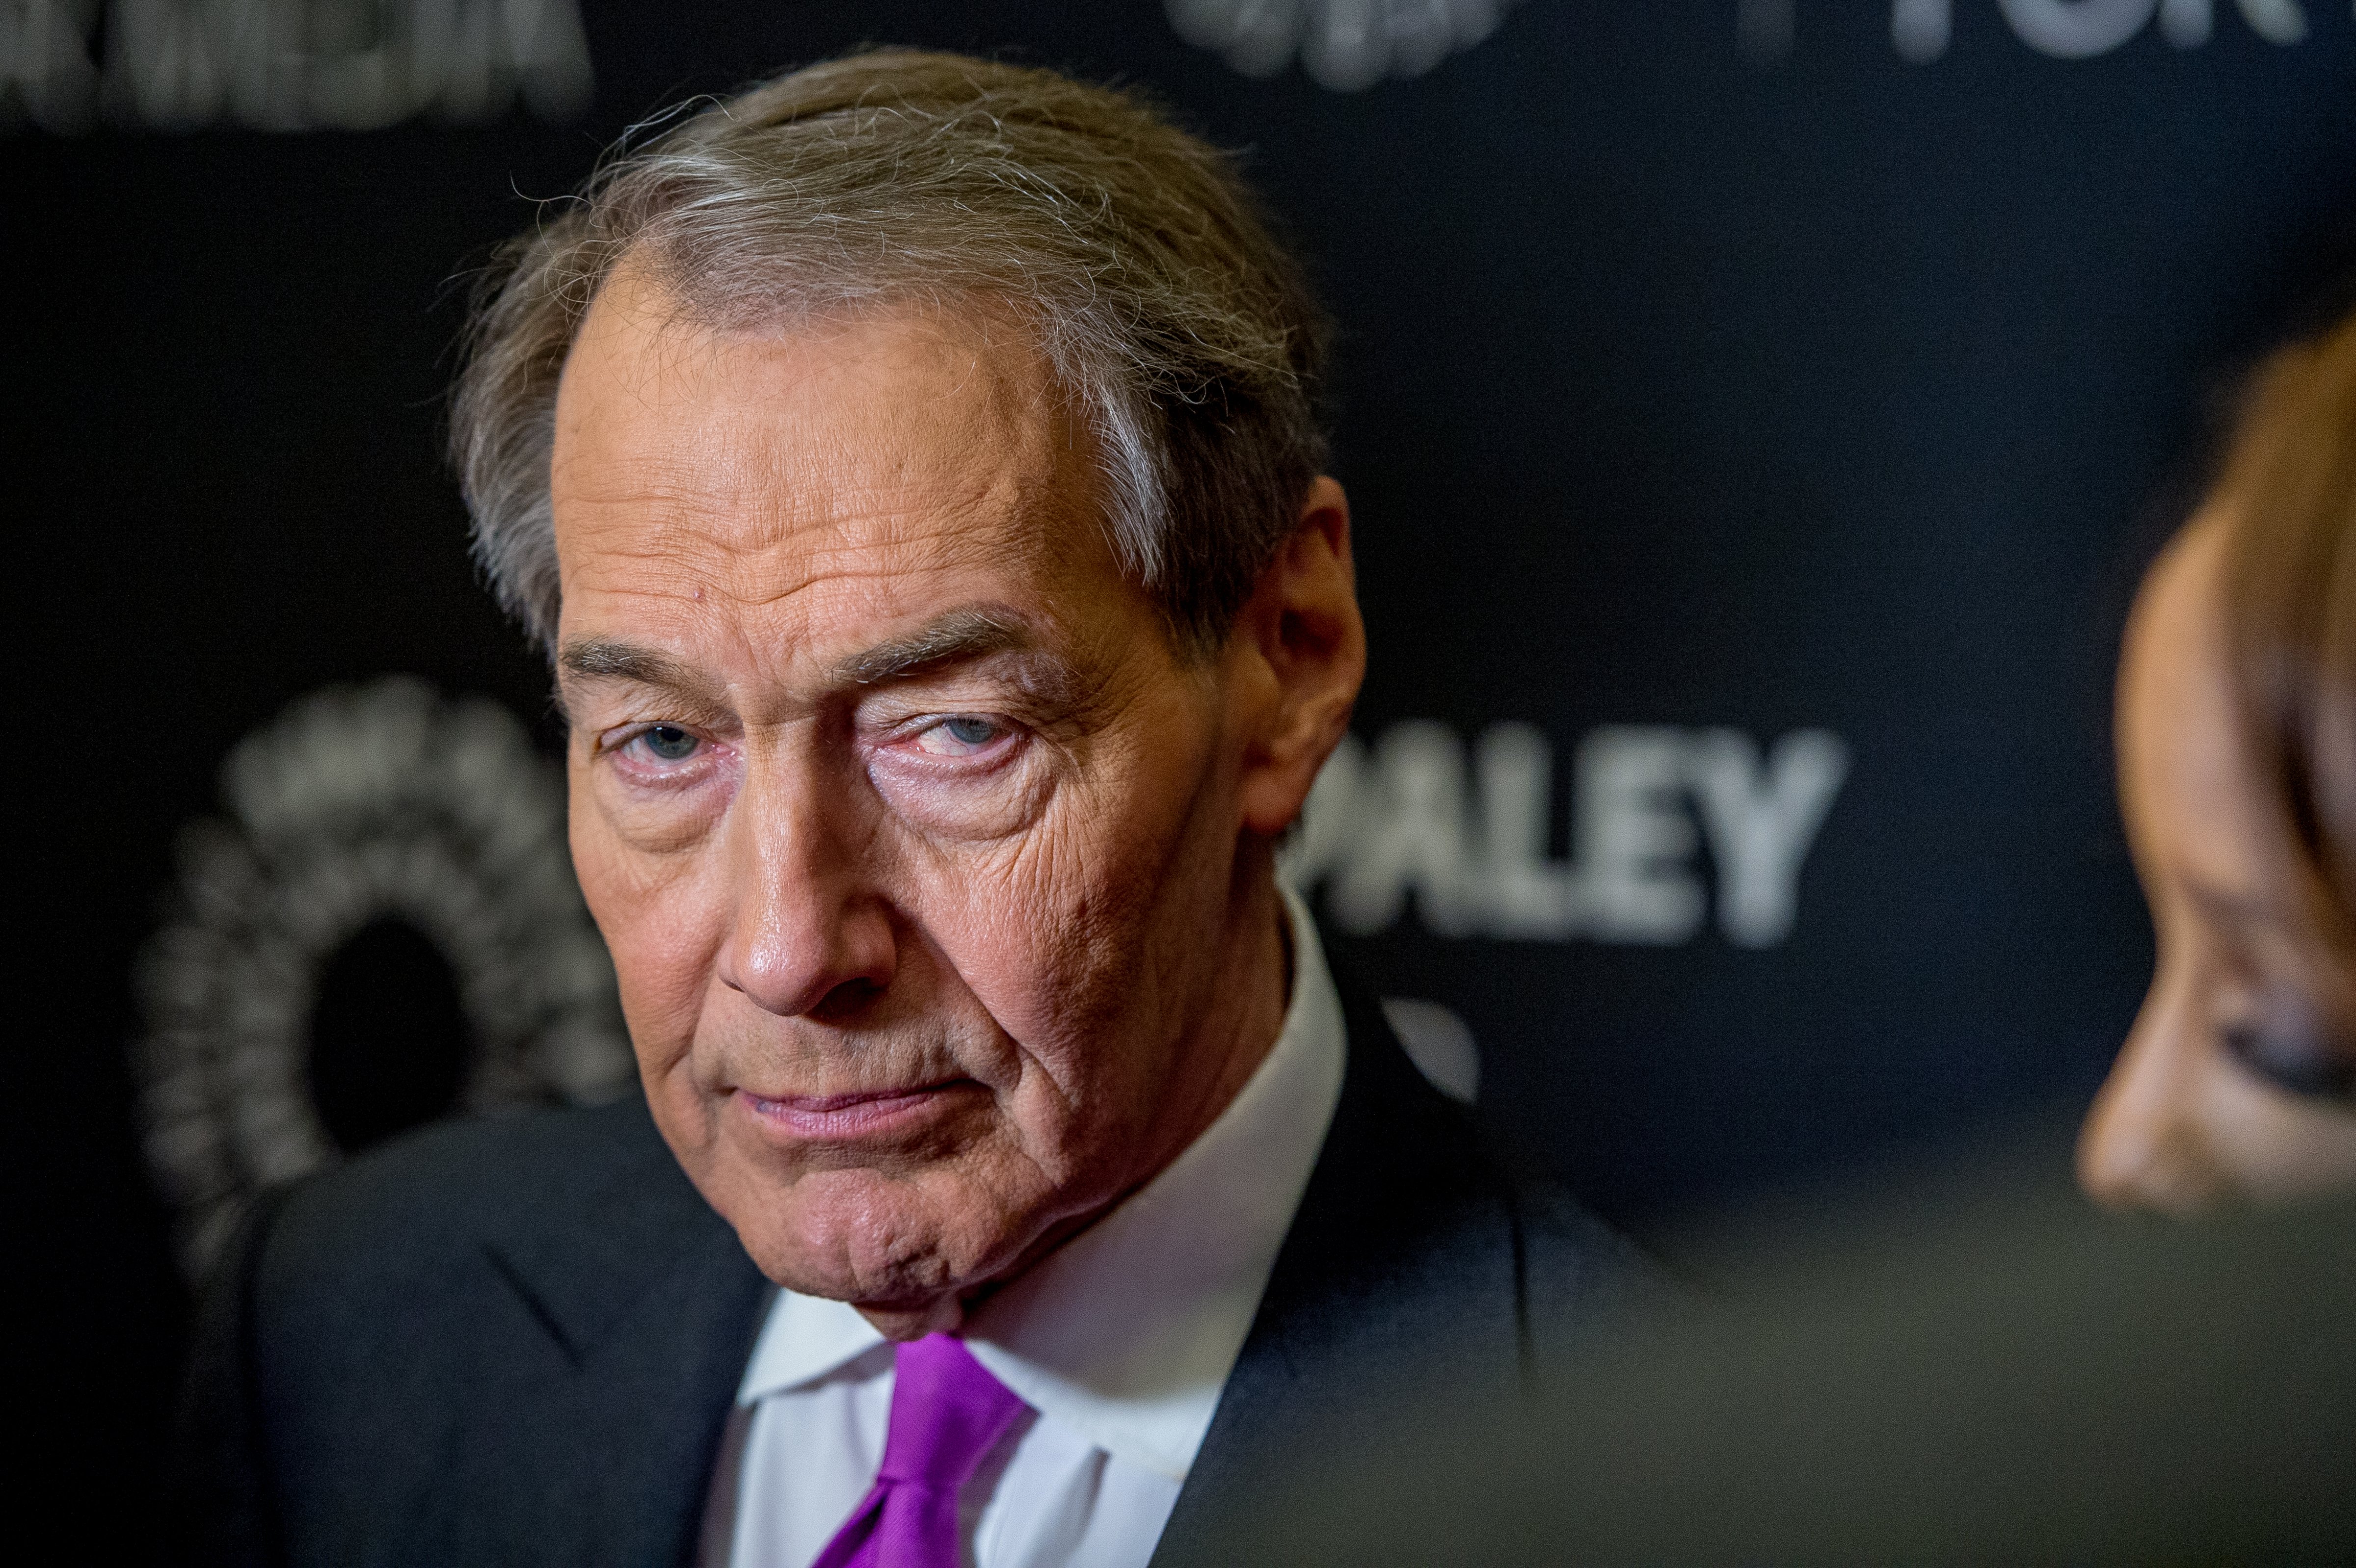 Charlie Rose attends an event at The Paley Center for Media in New York City, on Nov. 1, 2017. (Roy Rochlin—Getty Images)